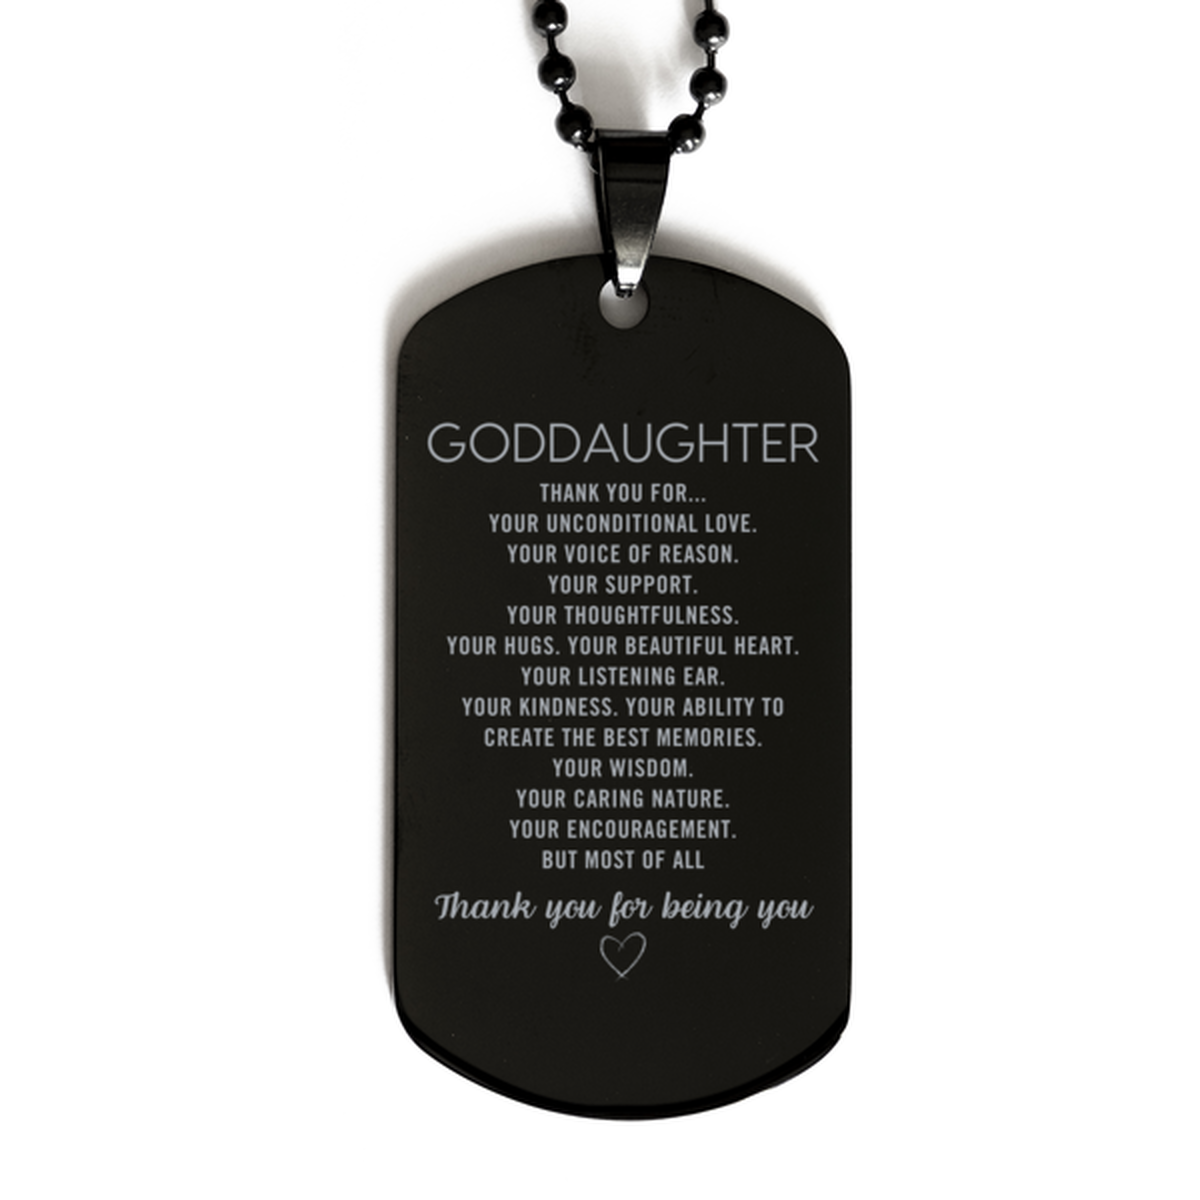 Goddaughter Black Dog Tag Custom, Engraved Gifts For Goddaughter Christmas Graduation Birthday Gifts for Men Women Goddaughter Thank you for Your unconditional love